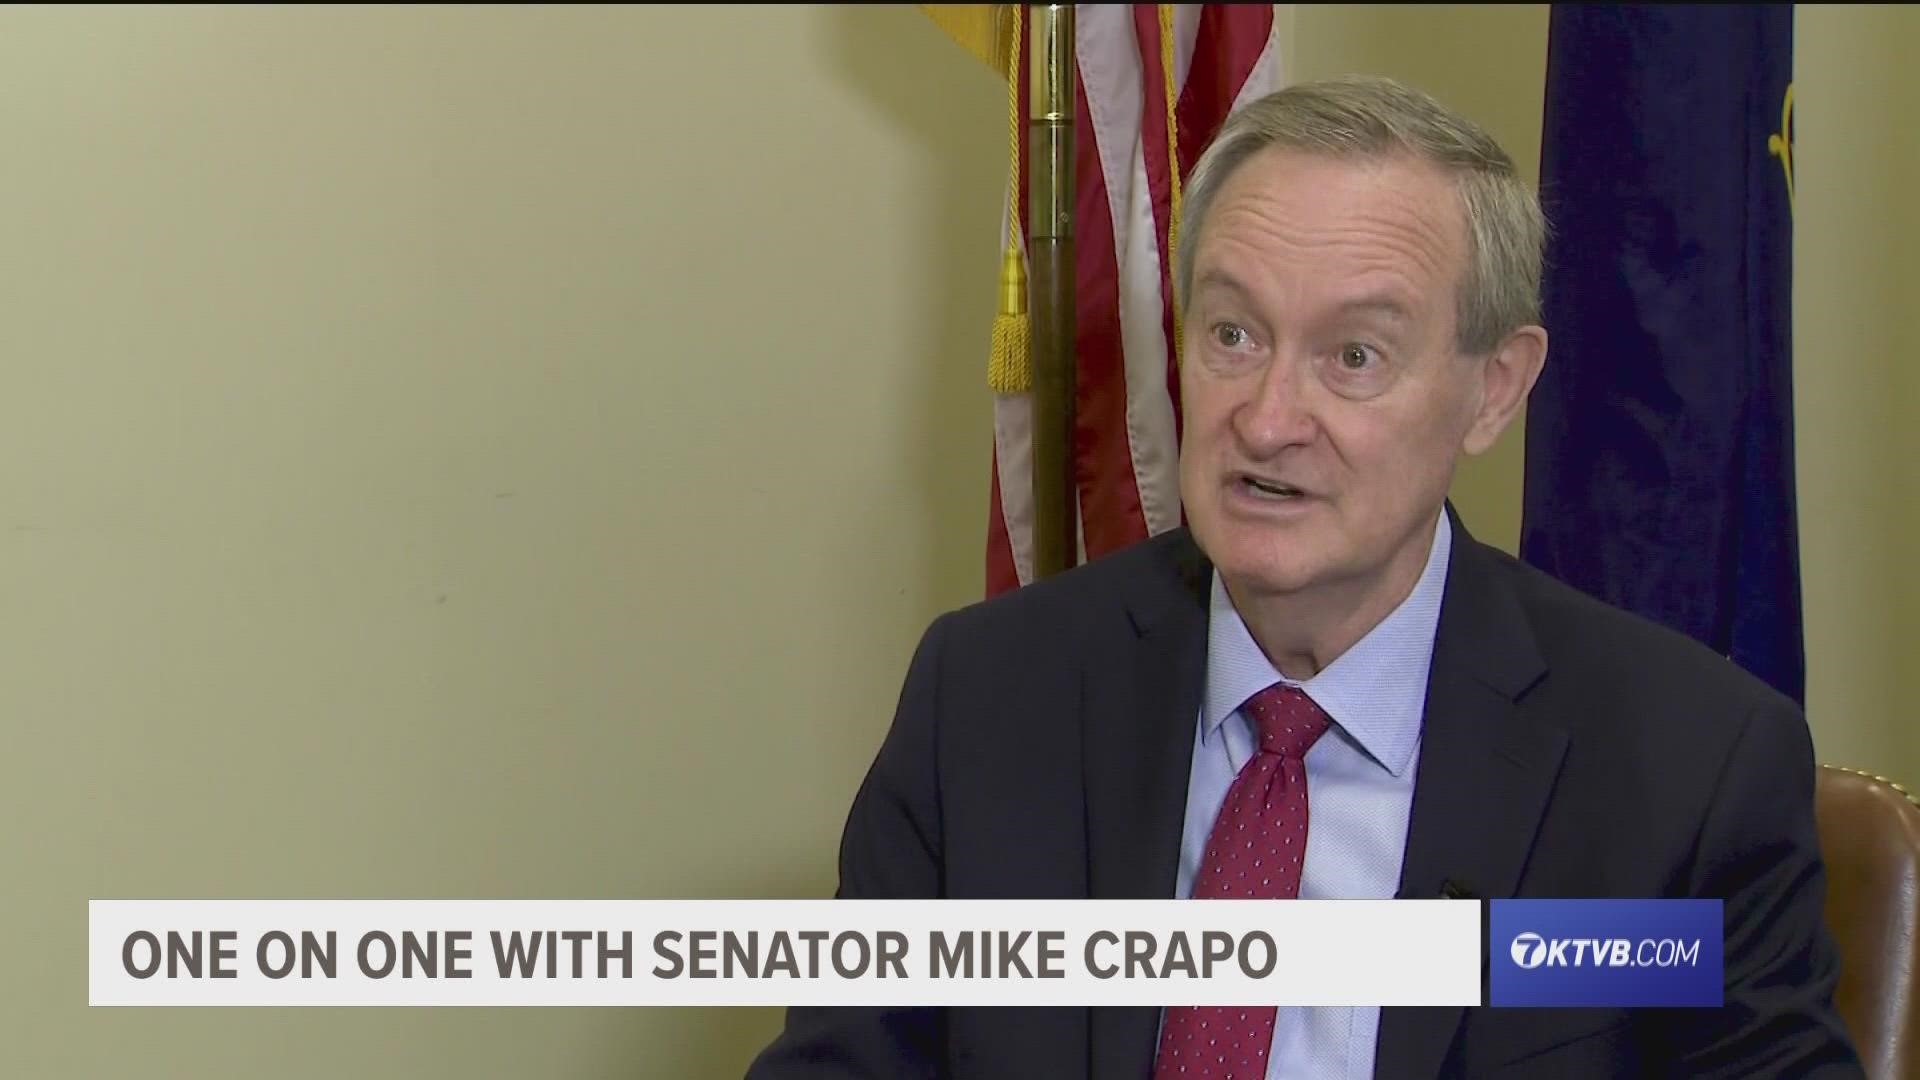 Senator Mike Crapo discusses big issues of the day, his recent votes on major bills, and why he is running for a fifth term.